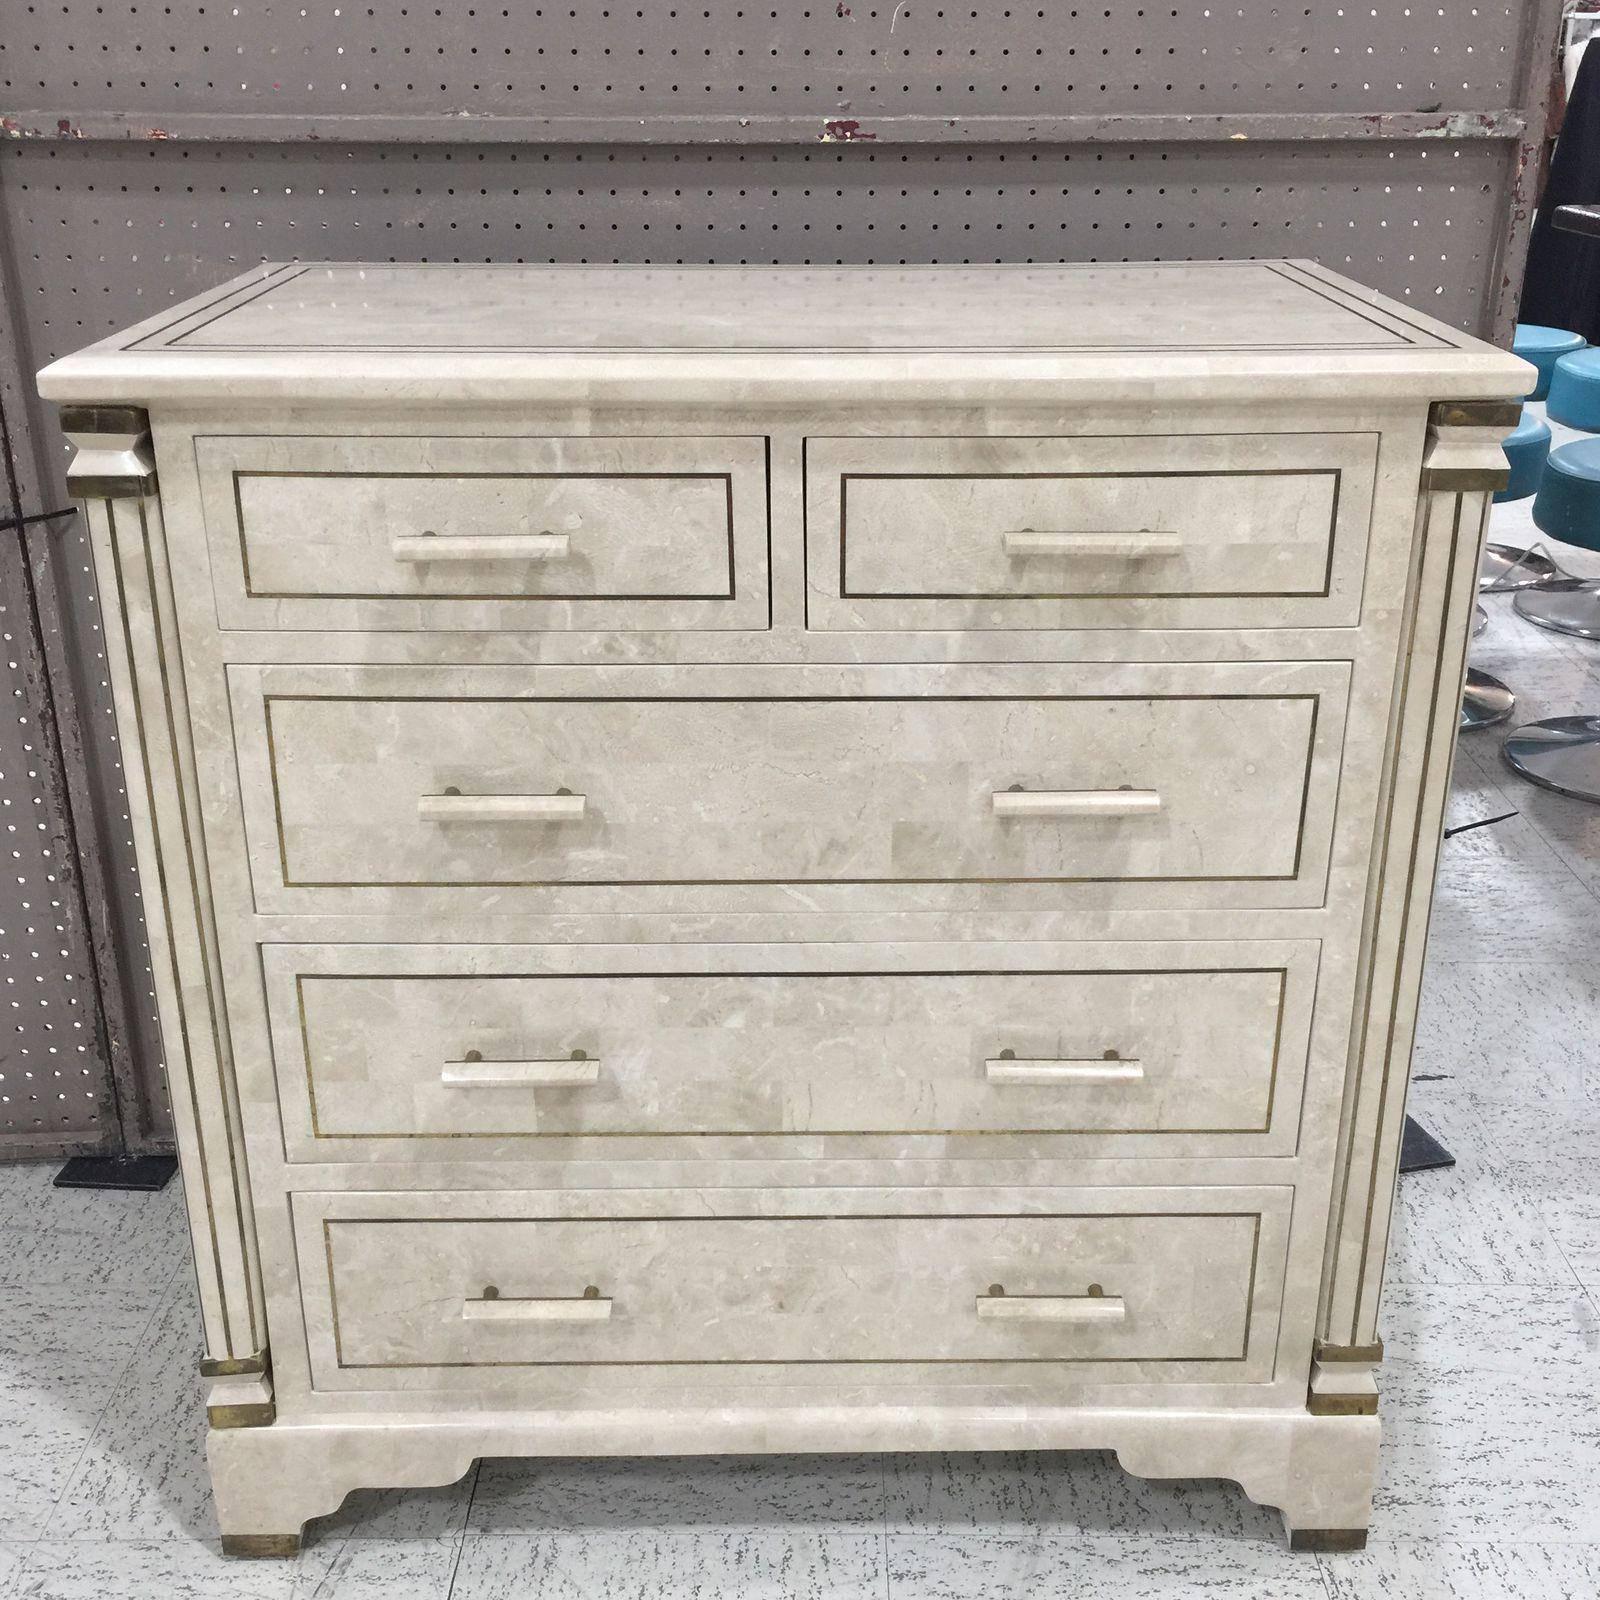 A neoclassical inspired chest of tessellated stone and brass inlay.
tone on tone stone gives this piece a clean modern look.
Great brass accents which highlight the form and design of this piece
fantastic scale and size.
 